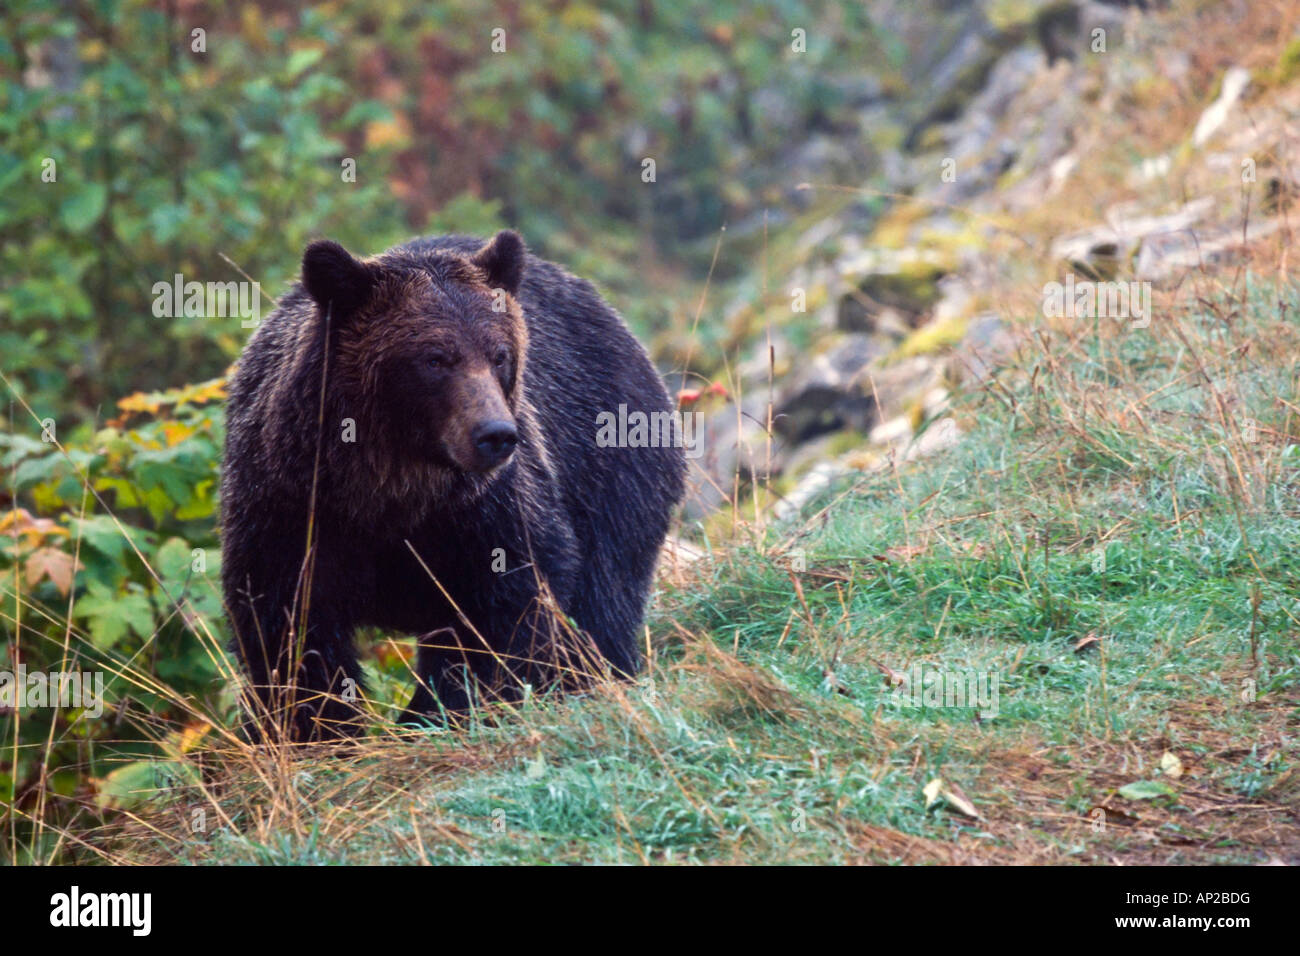 Grizzly Brown Bear standing on grassy slope looking up hill Stock Photo